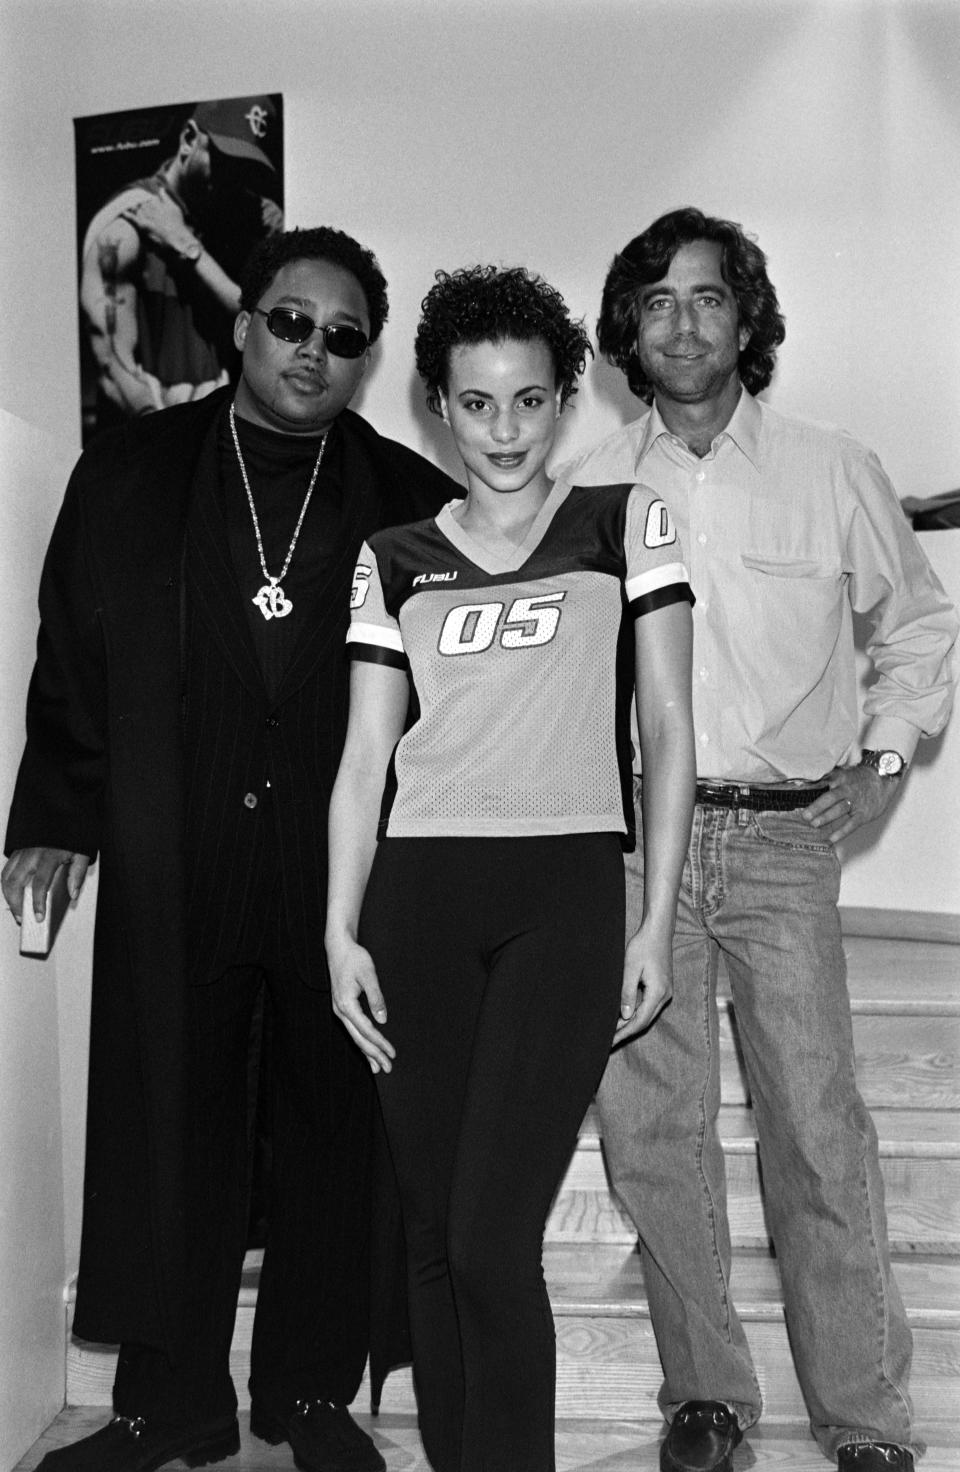 Designer-founder Daymond John and Jordache’s Elliott Lavigne pose with a model in a look from Fubu women’s debut sportswear collection for fall 1998. - Credit: WWD